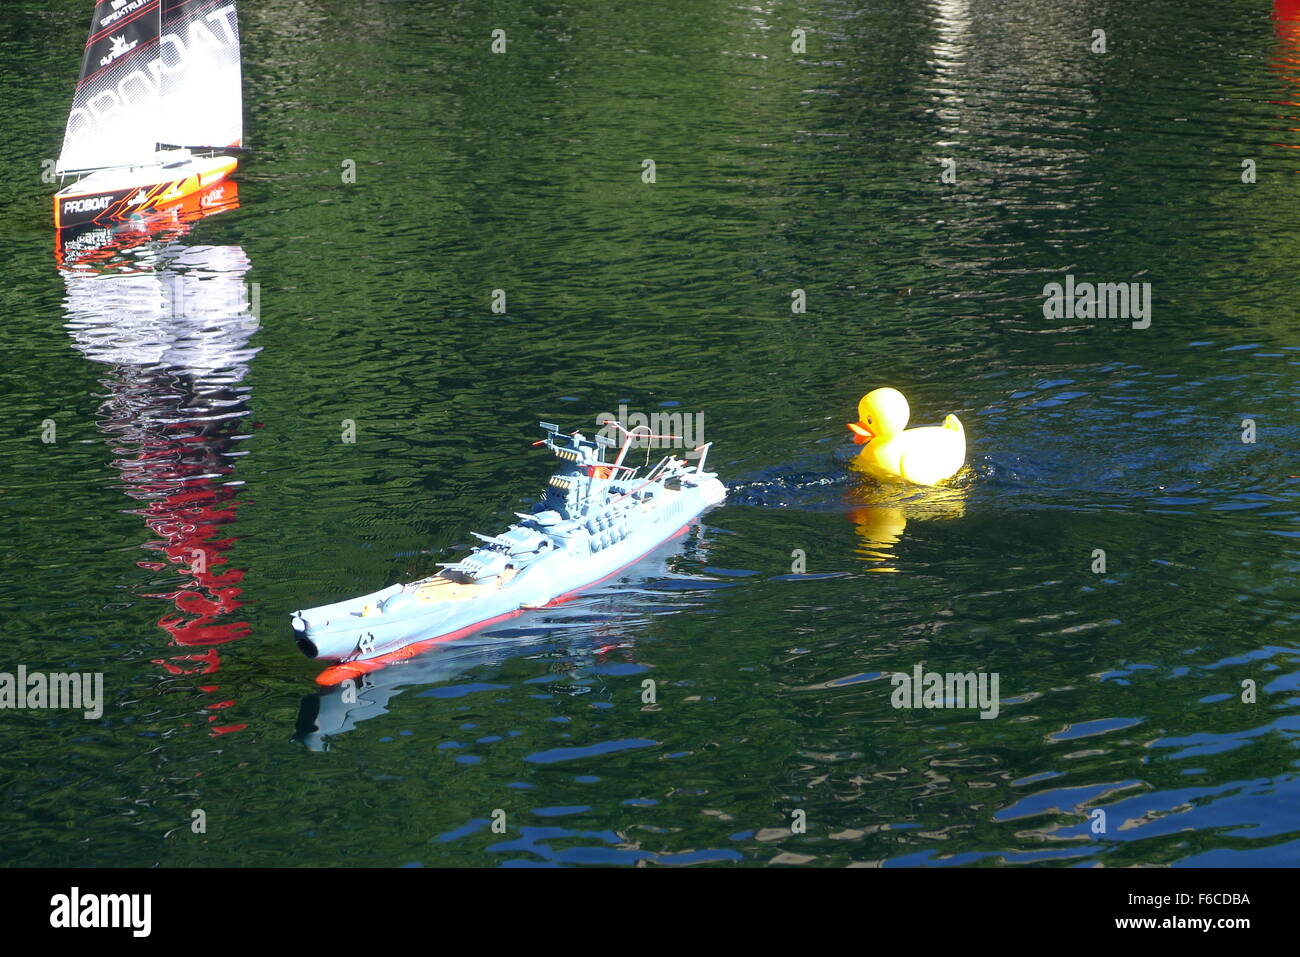 Toy Space Cruiser Argo and Rubber Yellow Duck on Conservatory Water in New York Central Park Stock Photo